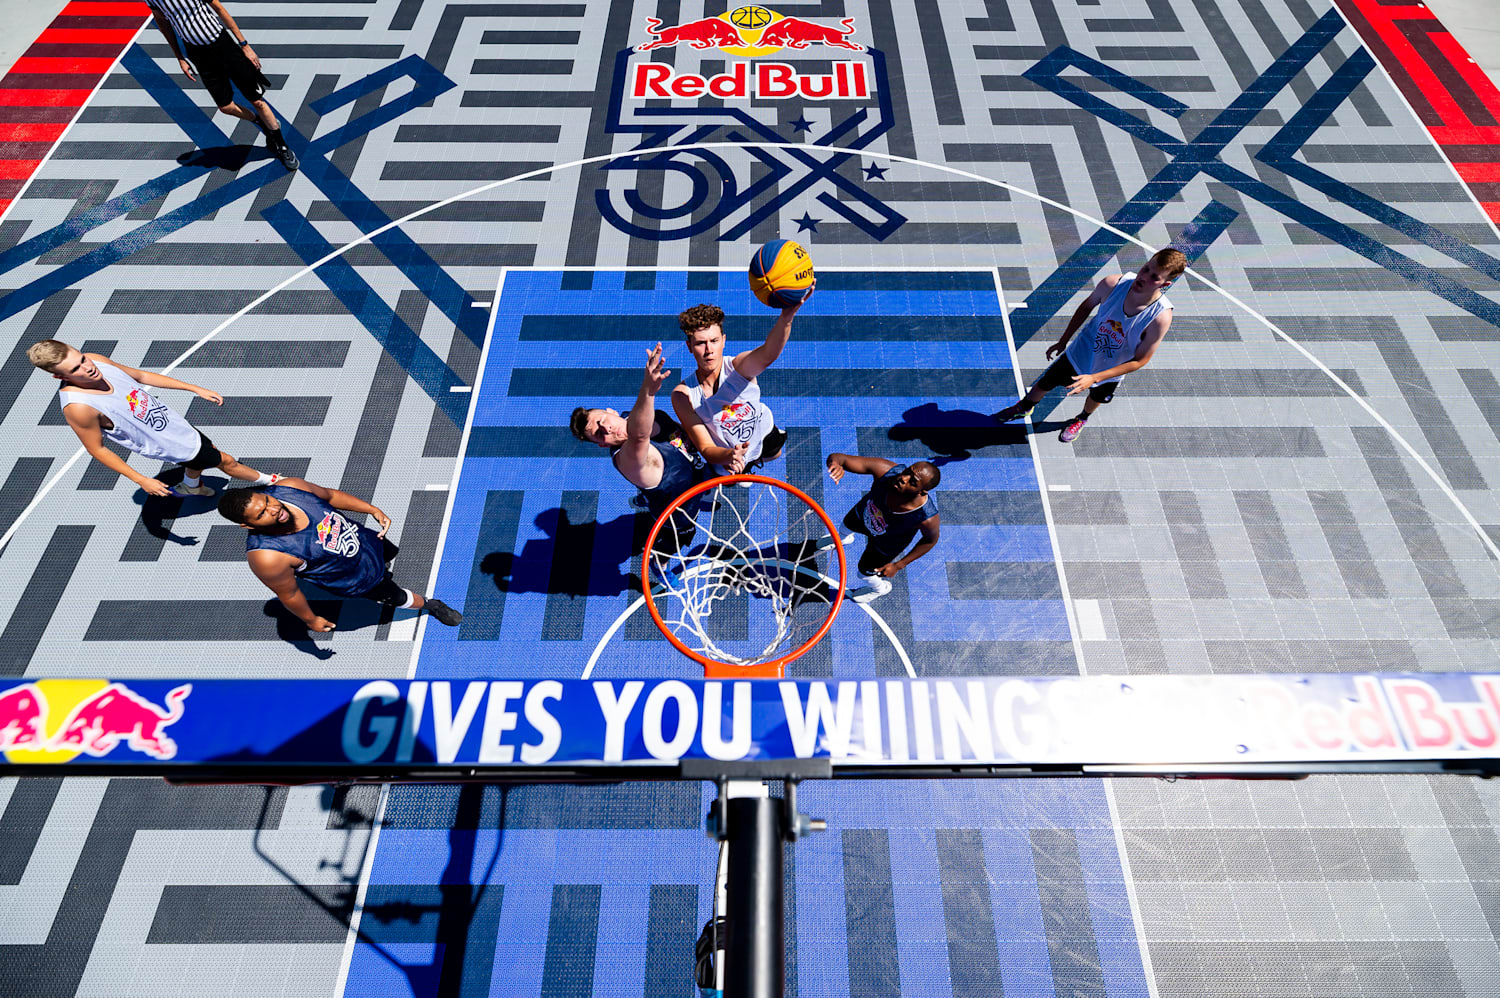 How many 3s could you hit? (Nba Range) @Red Bull USA #Excuseme #scusem